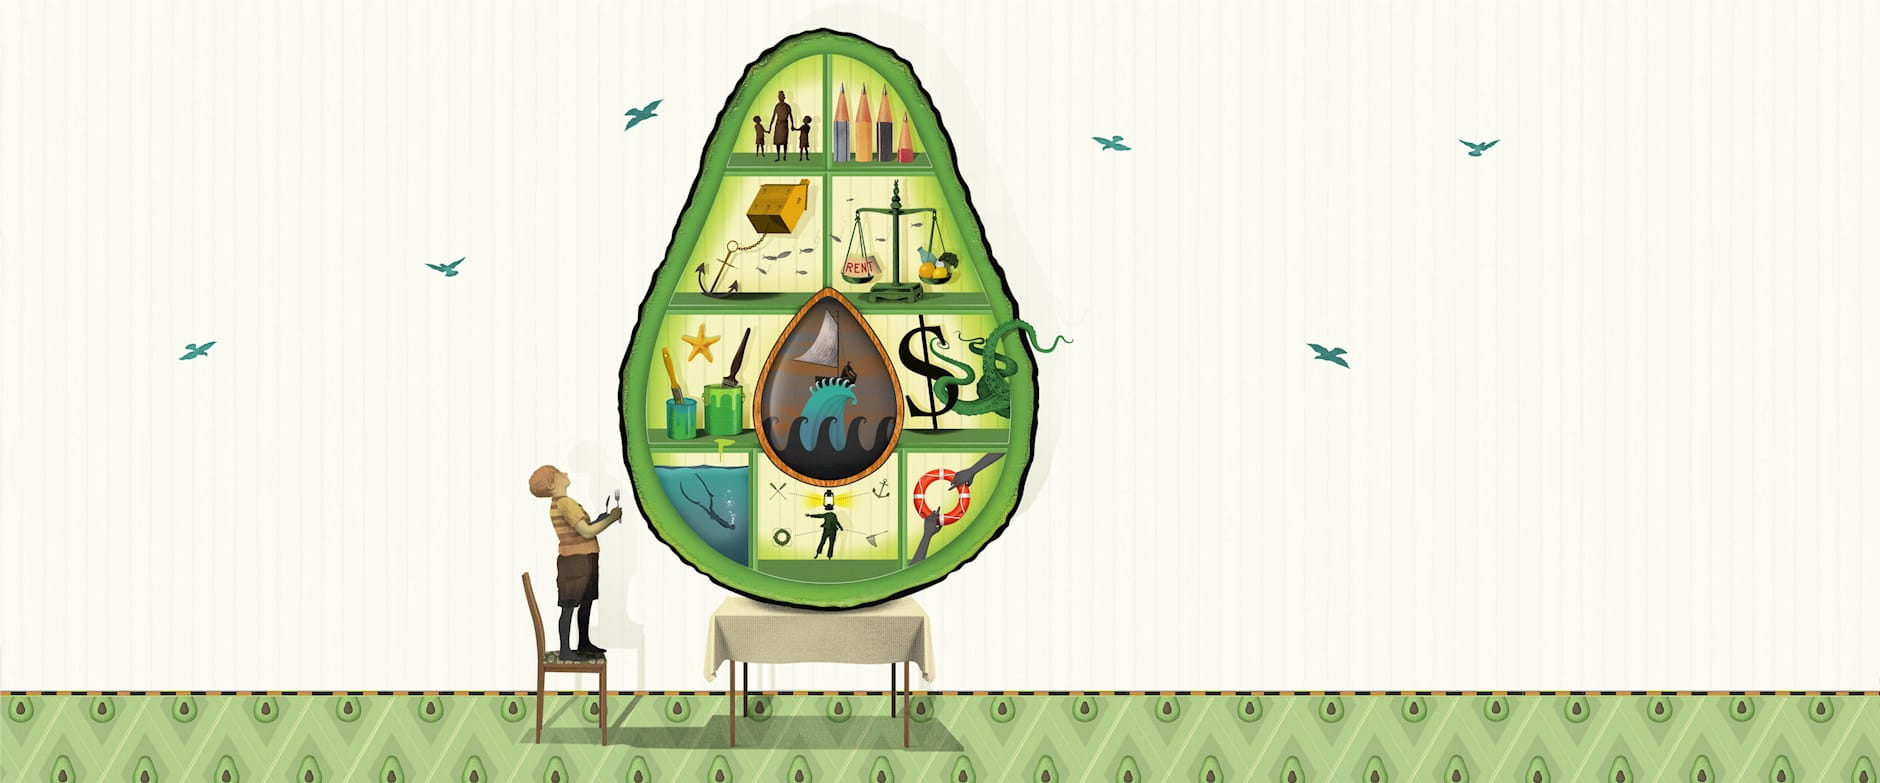 An illustrated oversized avocado used as a shelf, with a child standing next to it